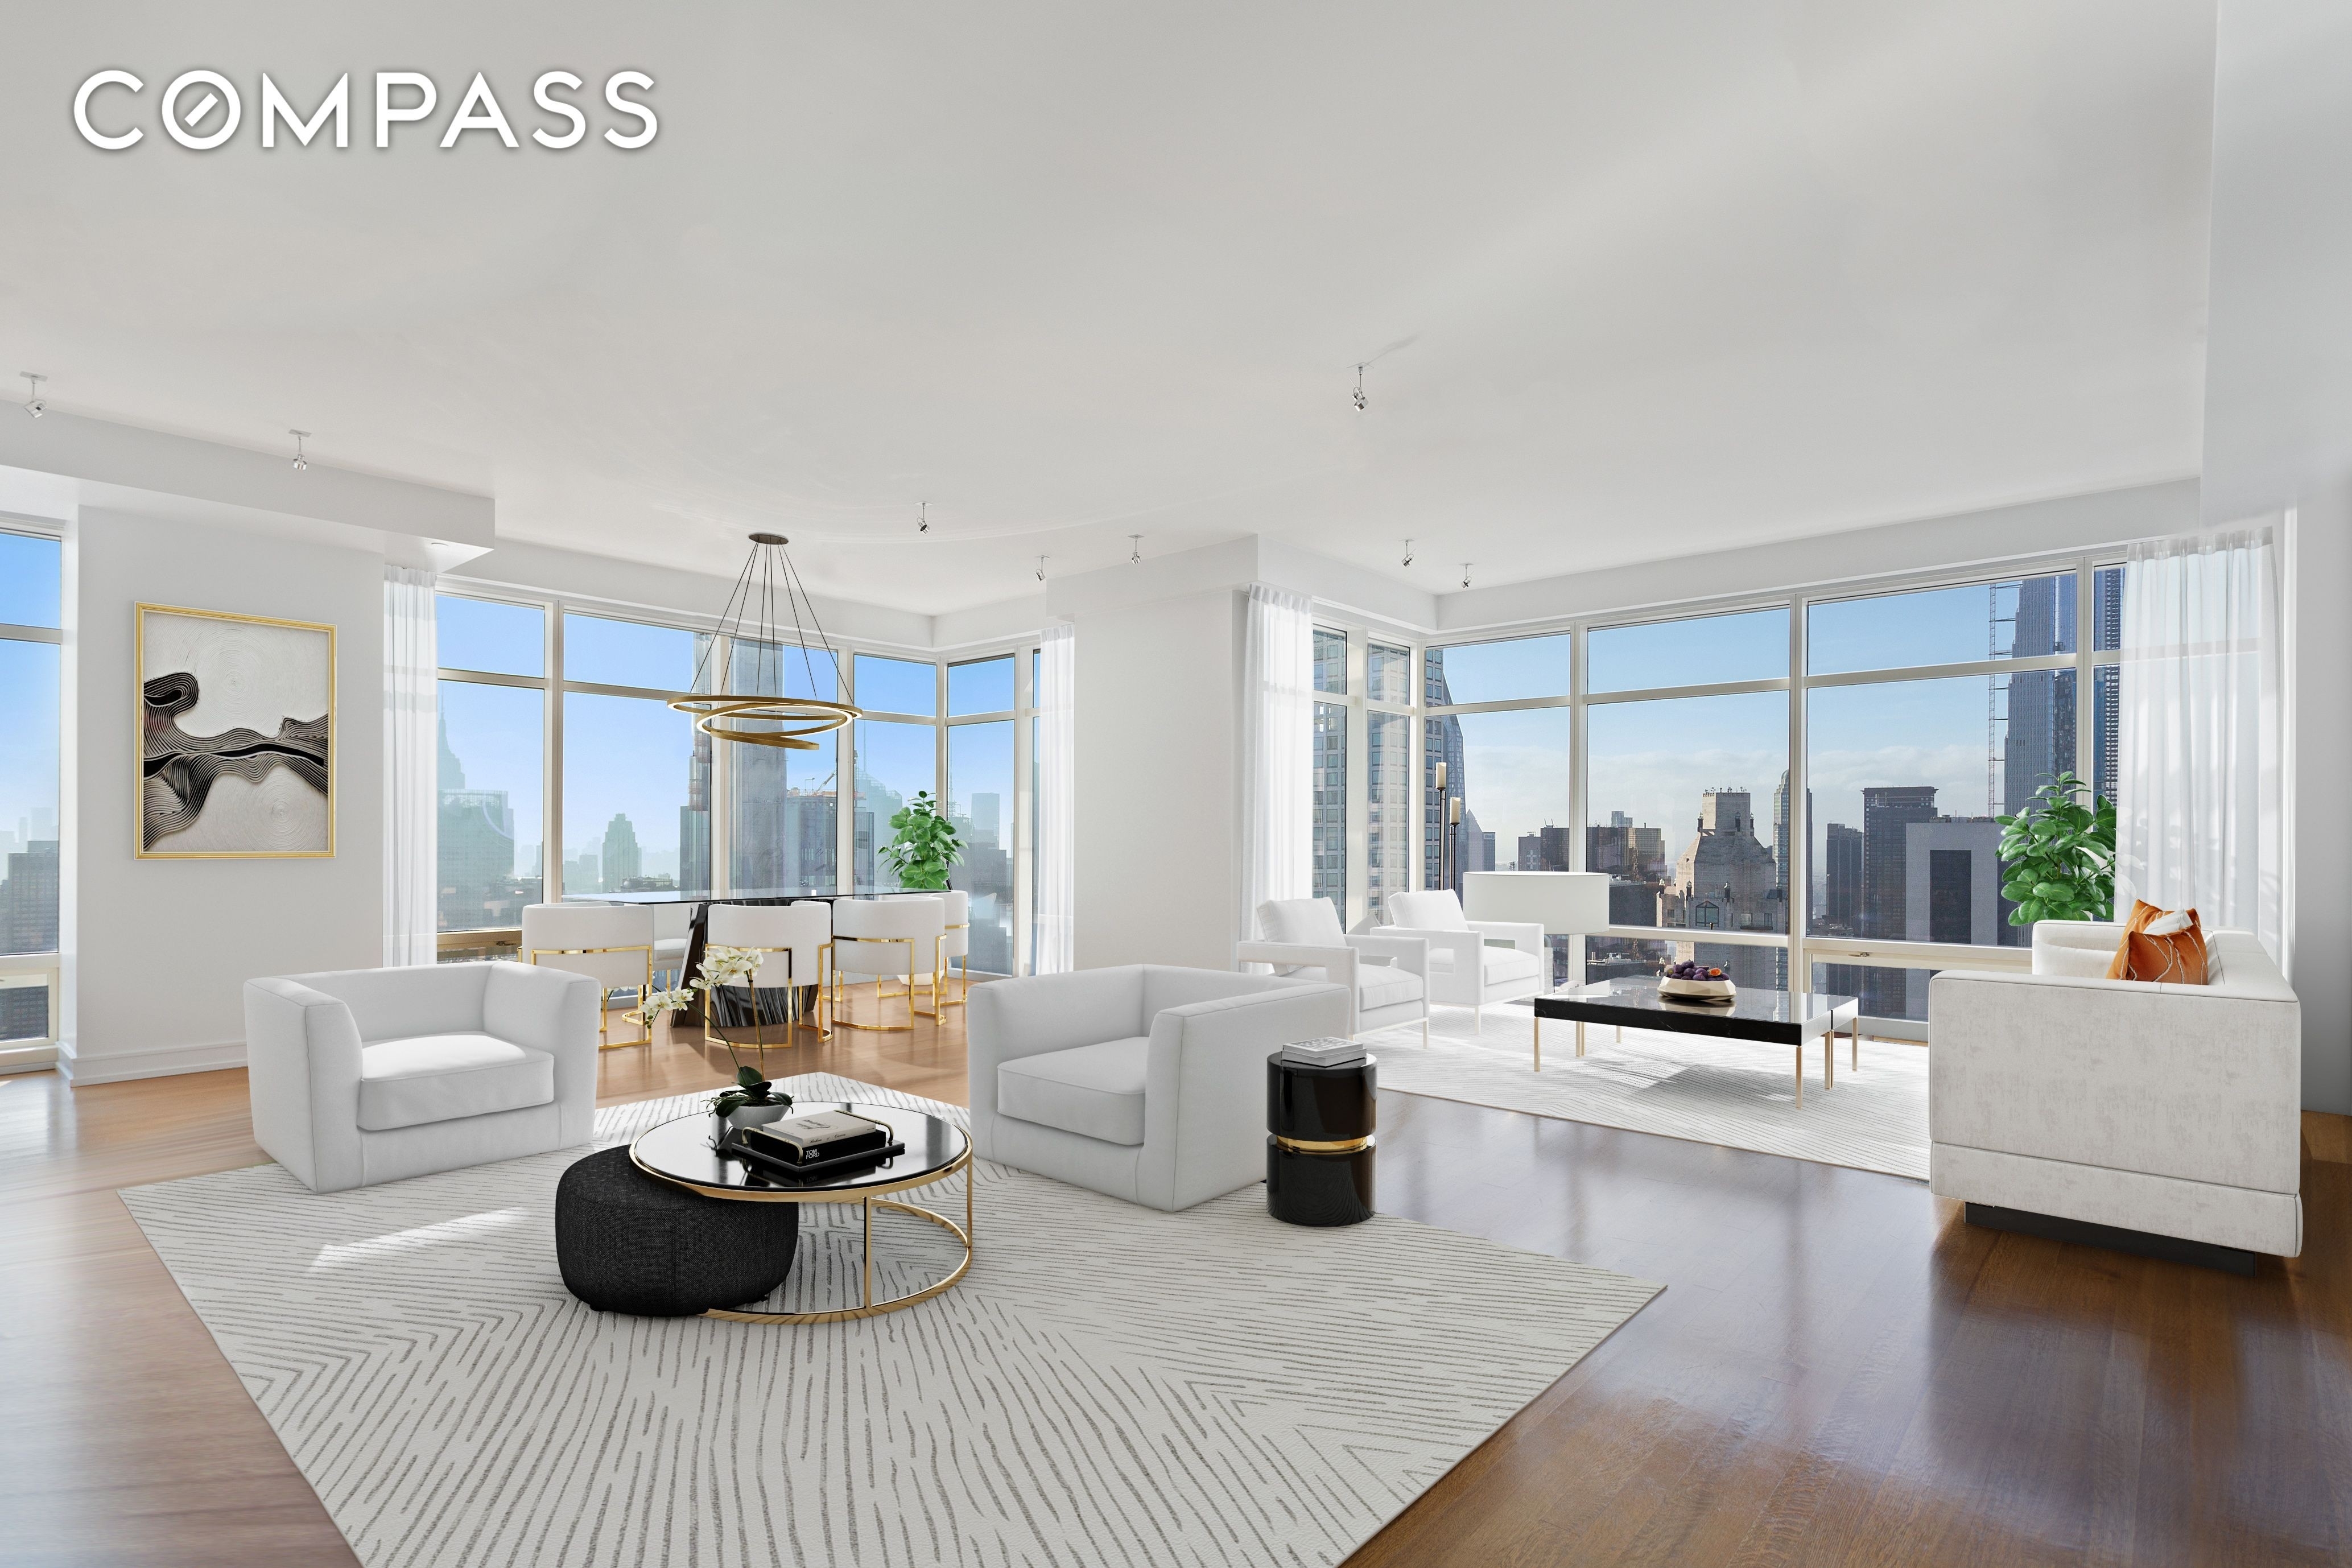 Property at Midtown East, New York, NY 10022